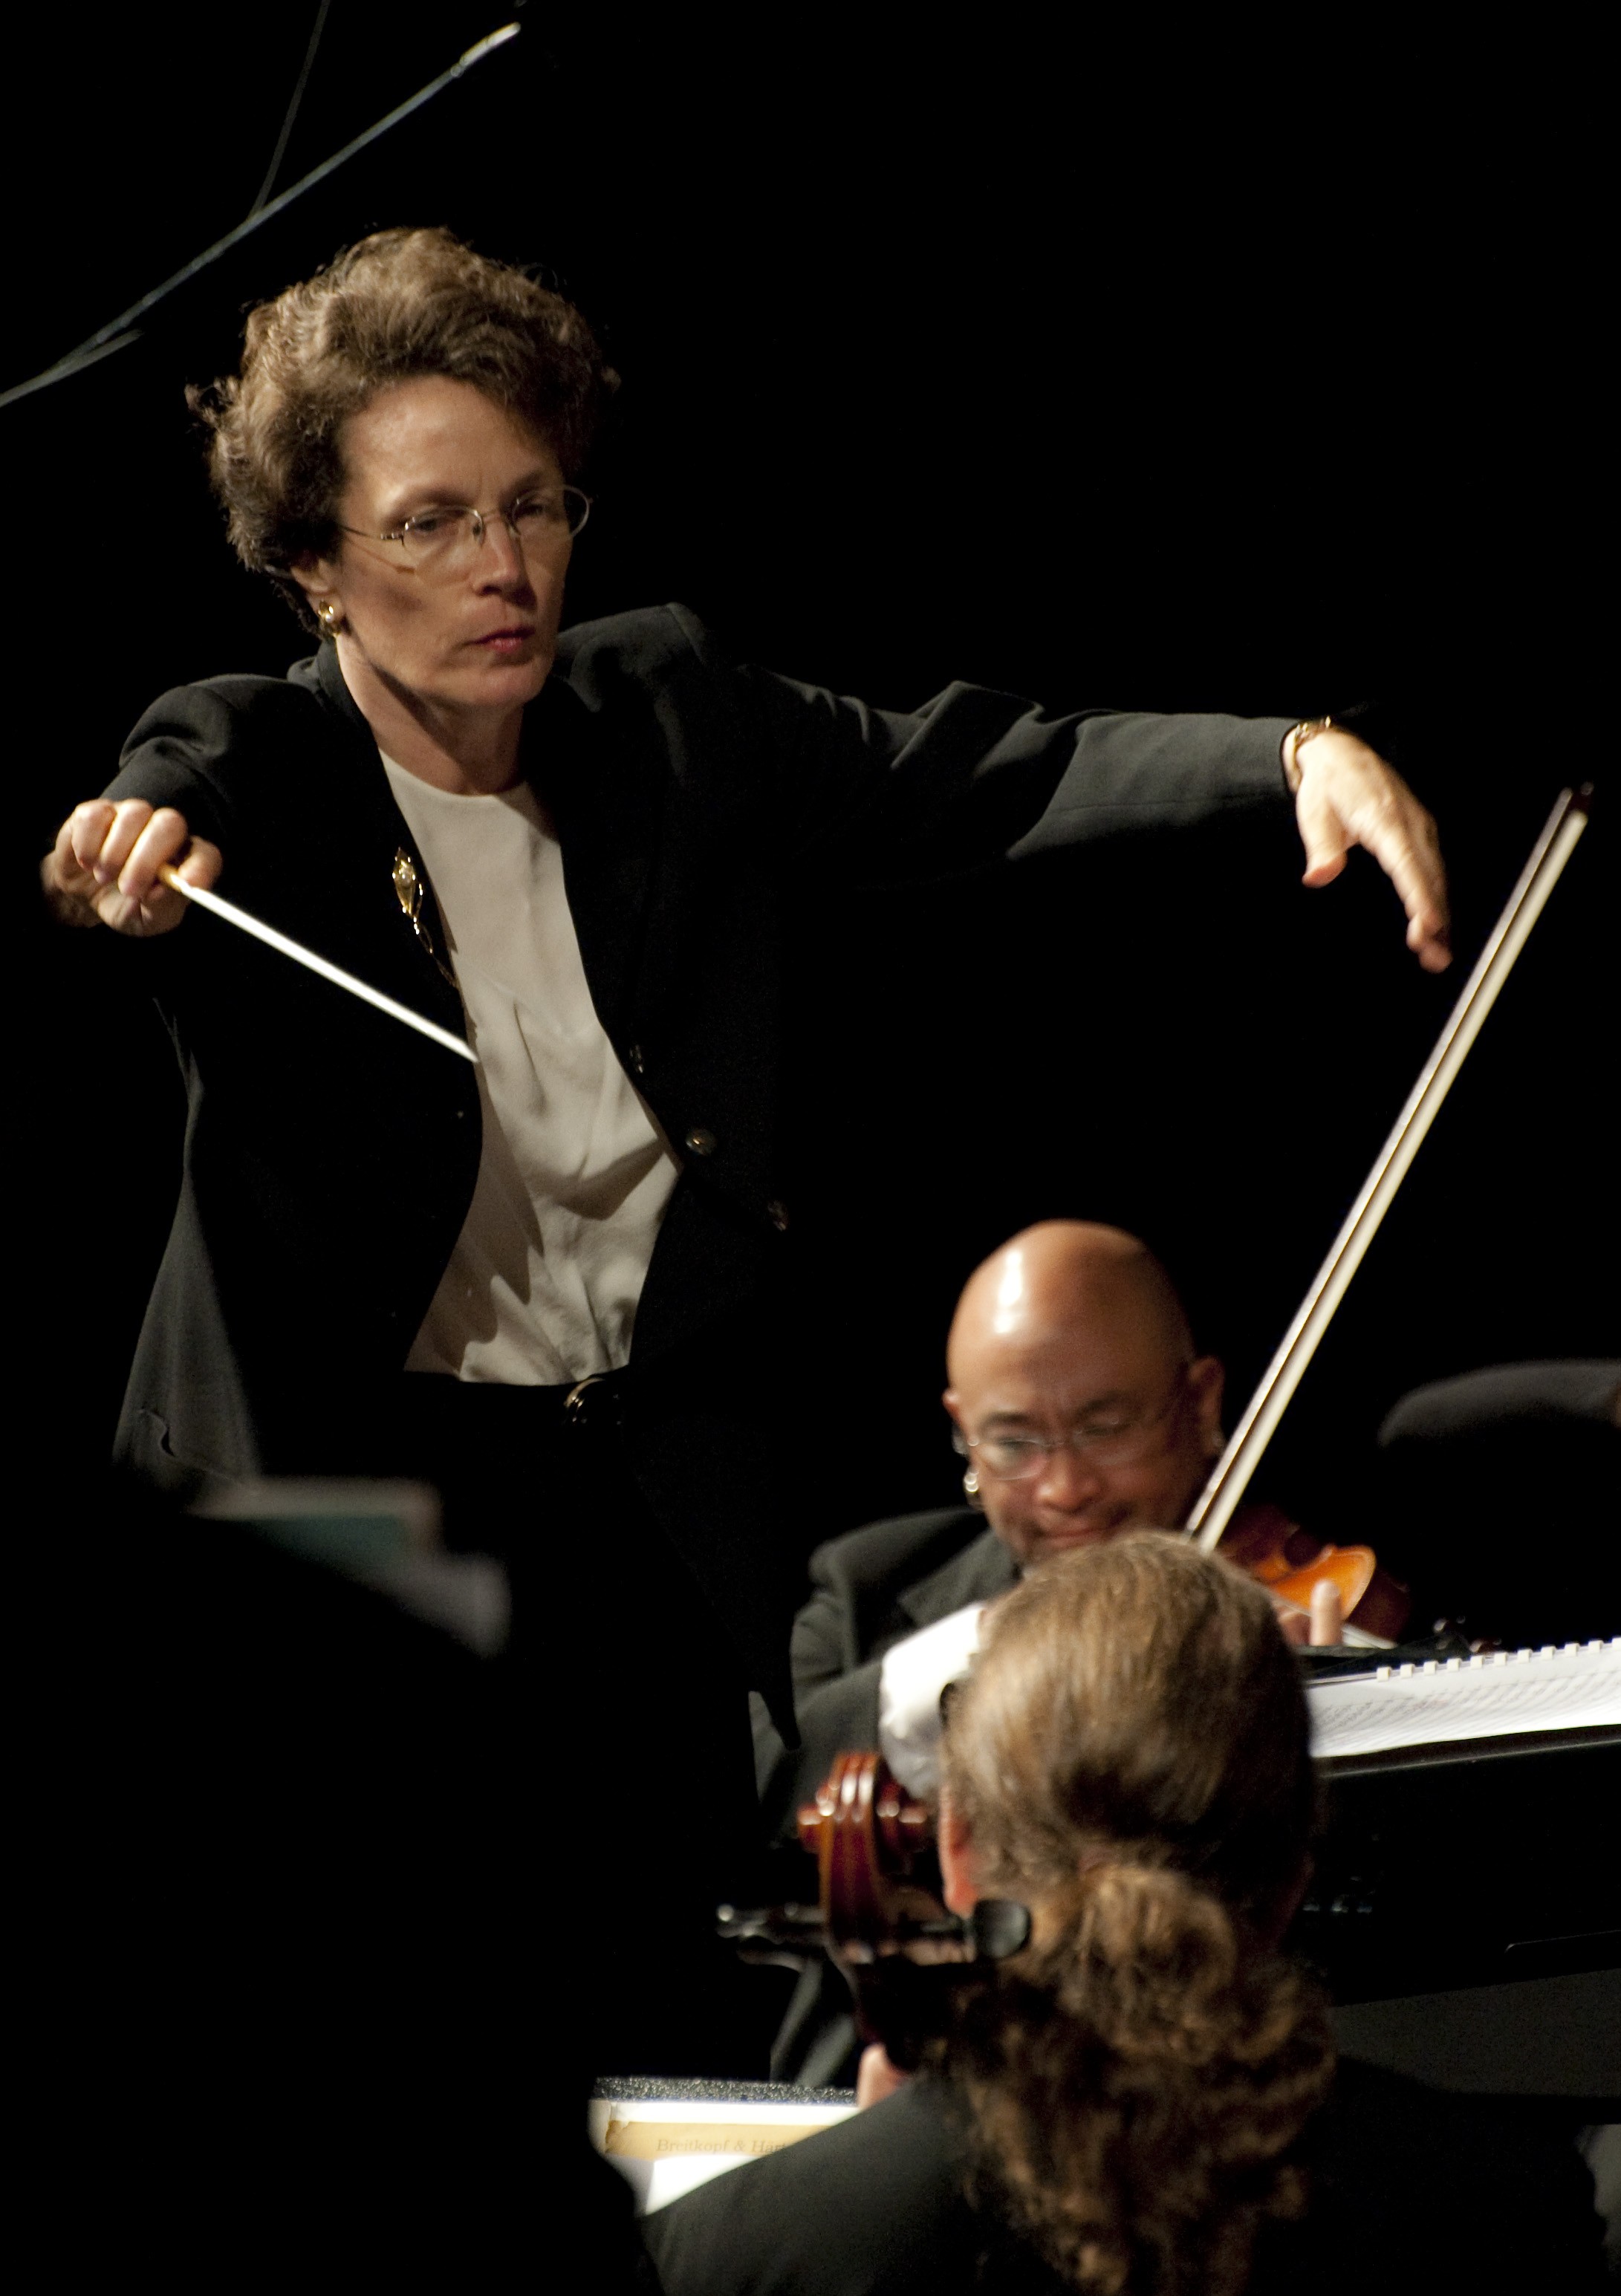 The Oconomowoc Chamber Orchestra performs its Debut Concert. Marvin Suson, Concertmaster. Roberta Carpenter, Conductor